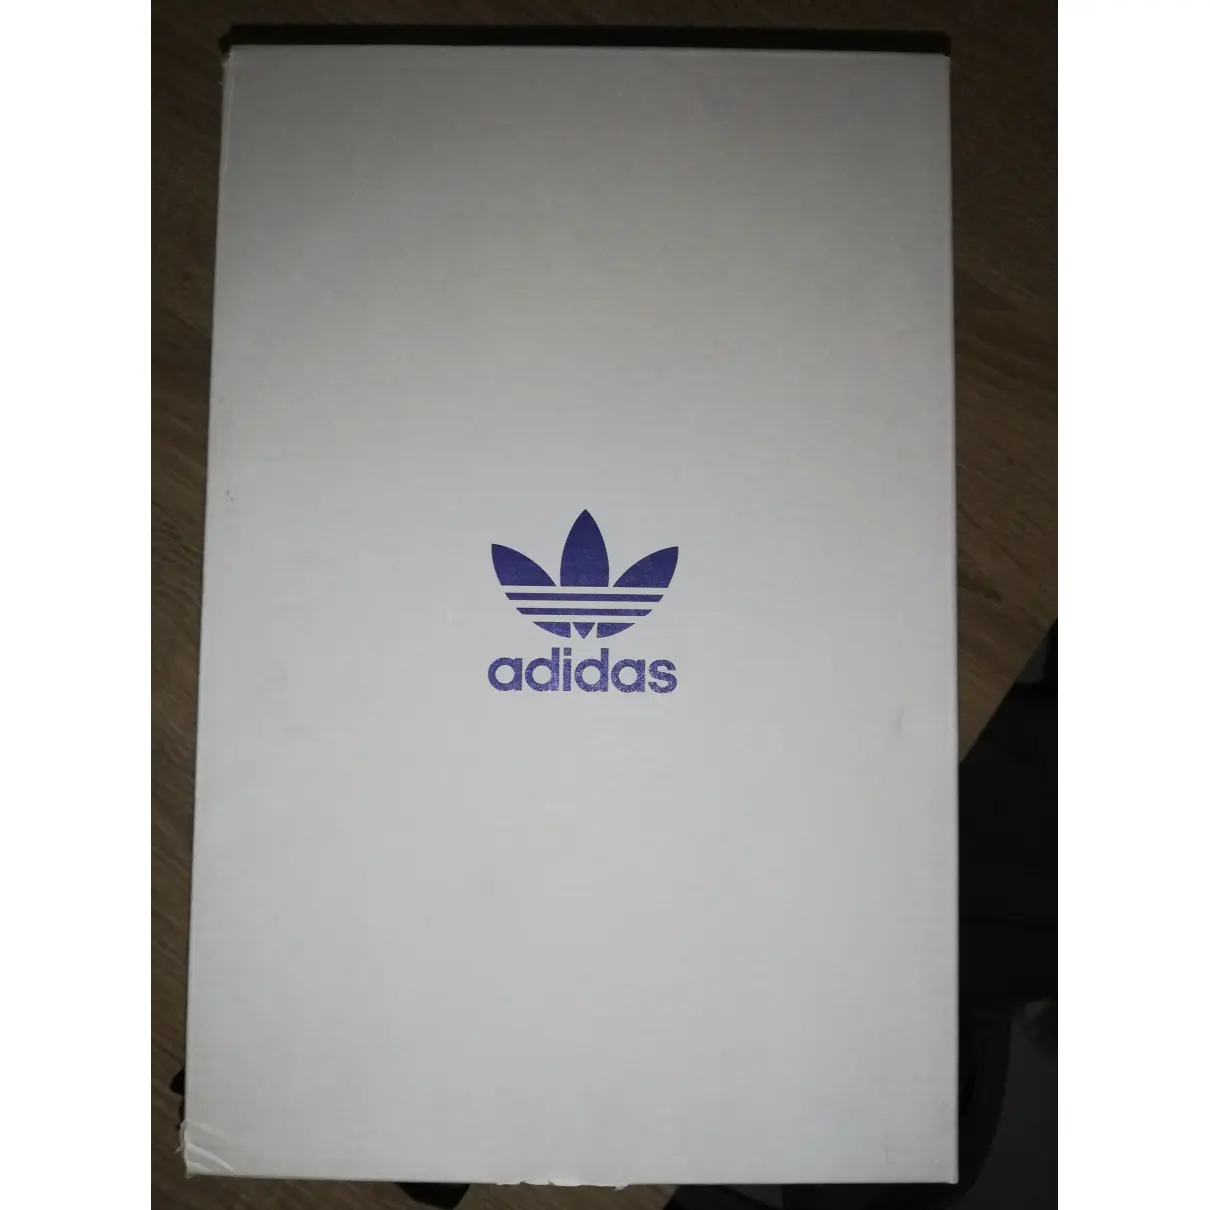 Patent leather trainers Adidas